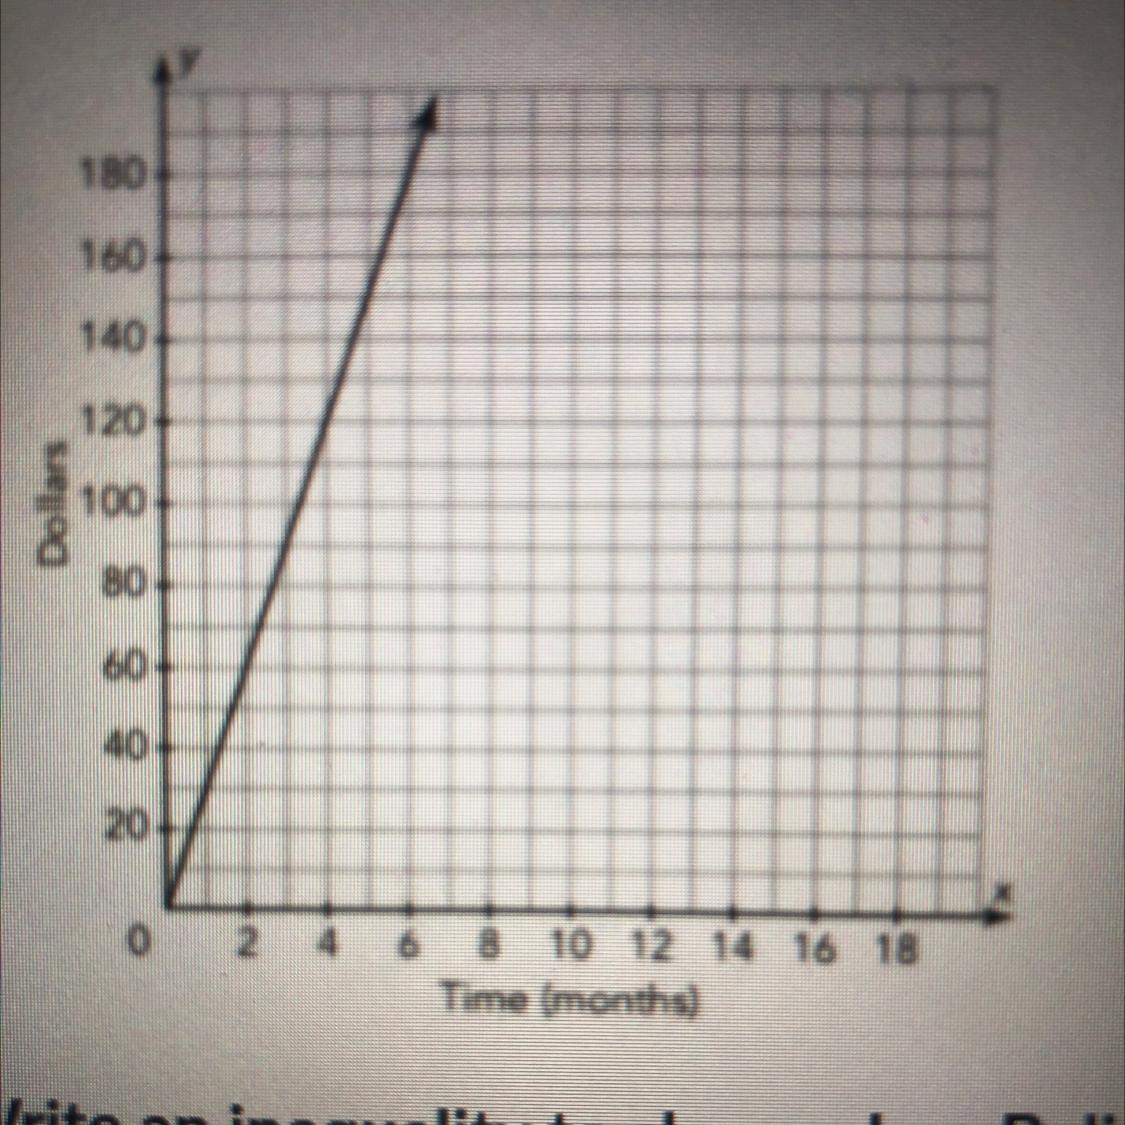 Belinda Has A Savings Account. Every Month She Deposits $30 In It. The Graph Shows The Relationship Between